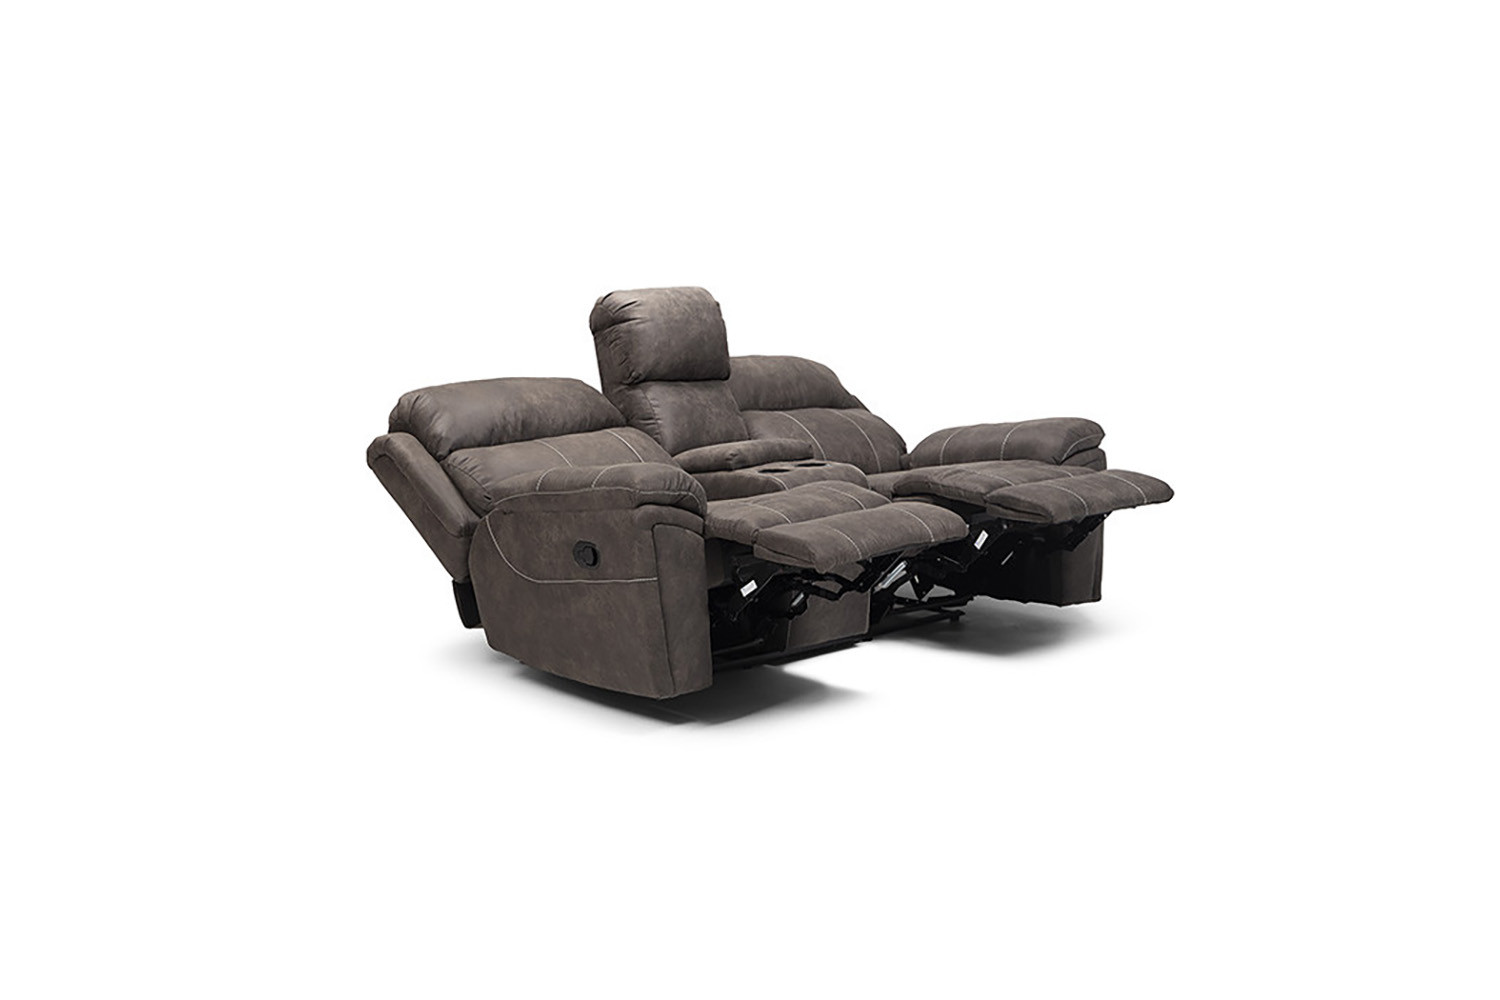 Ossian 2 Seater Recliner - Fossil -